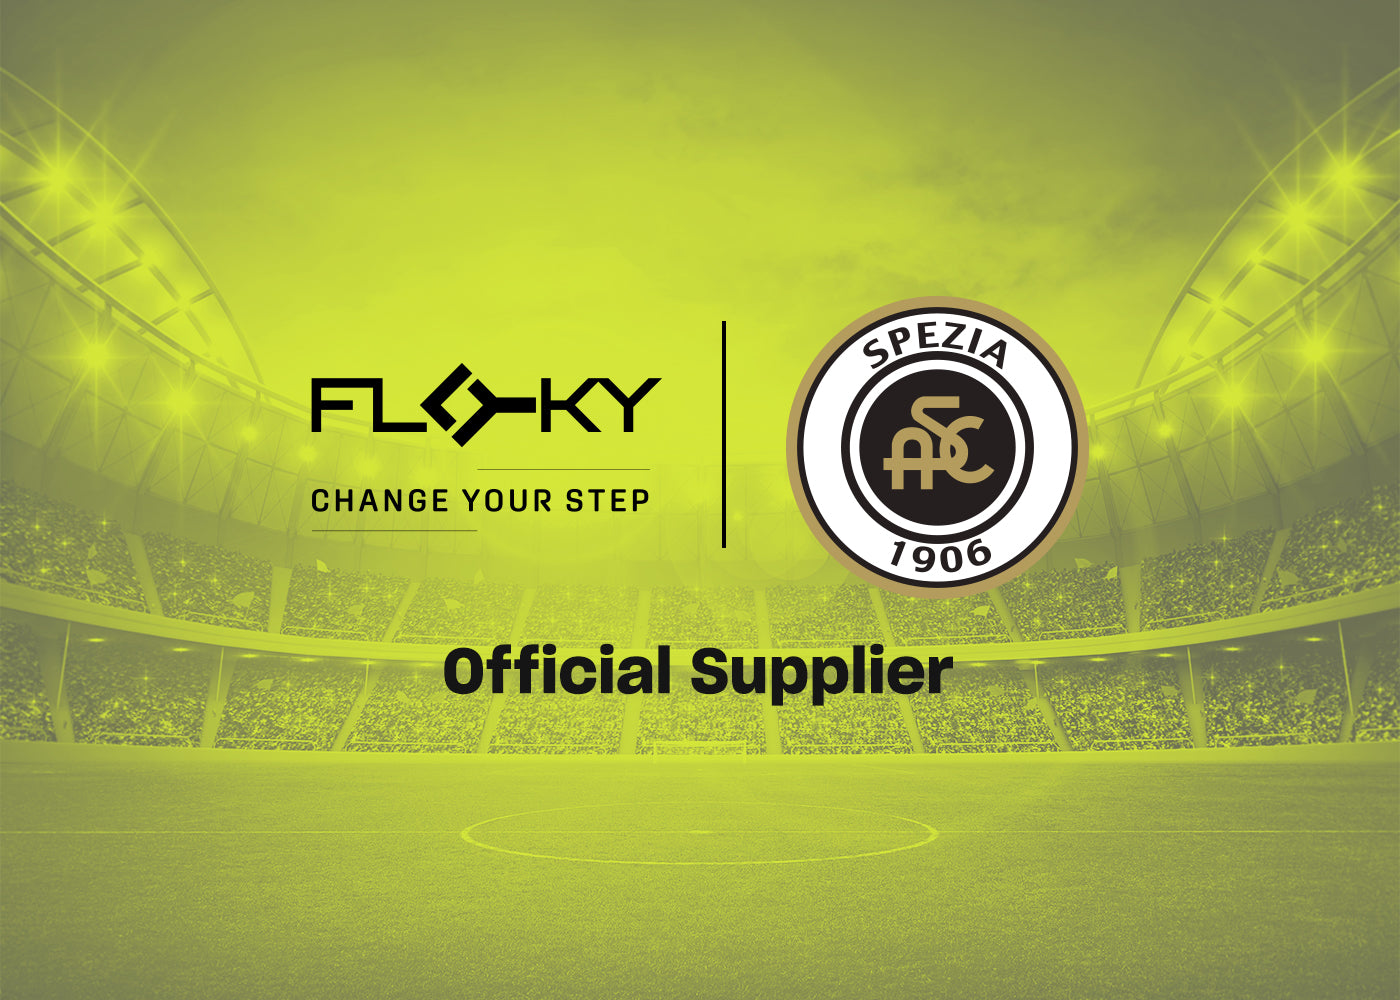 A story of commitment, passion and revenge: FLOKY Official Supplier of Spezia Calcio